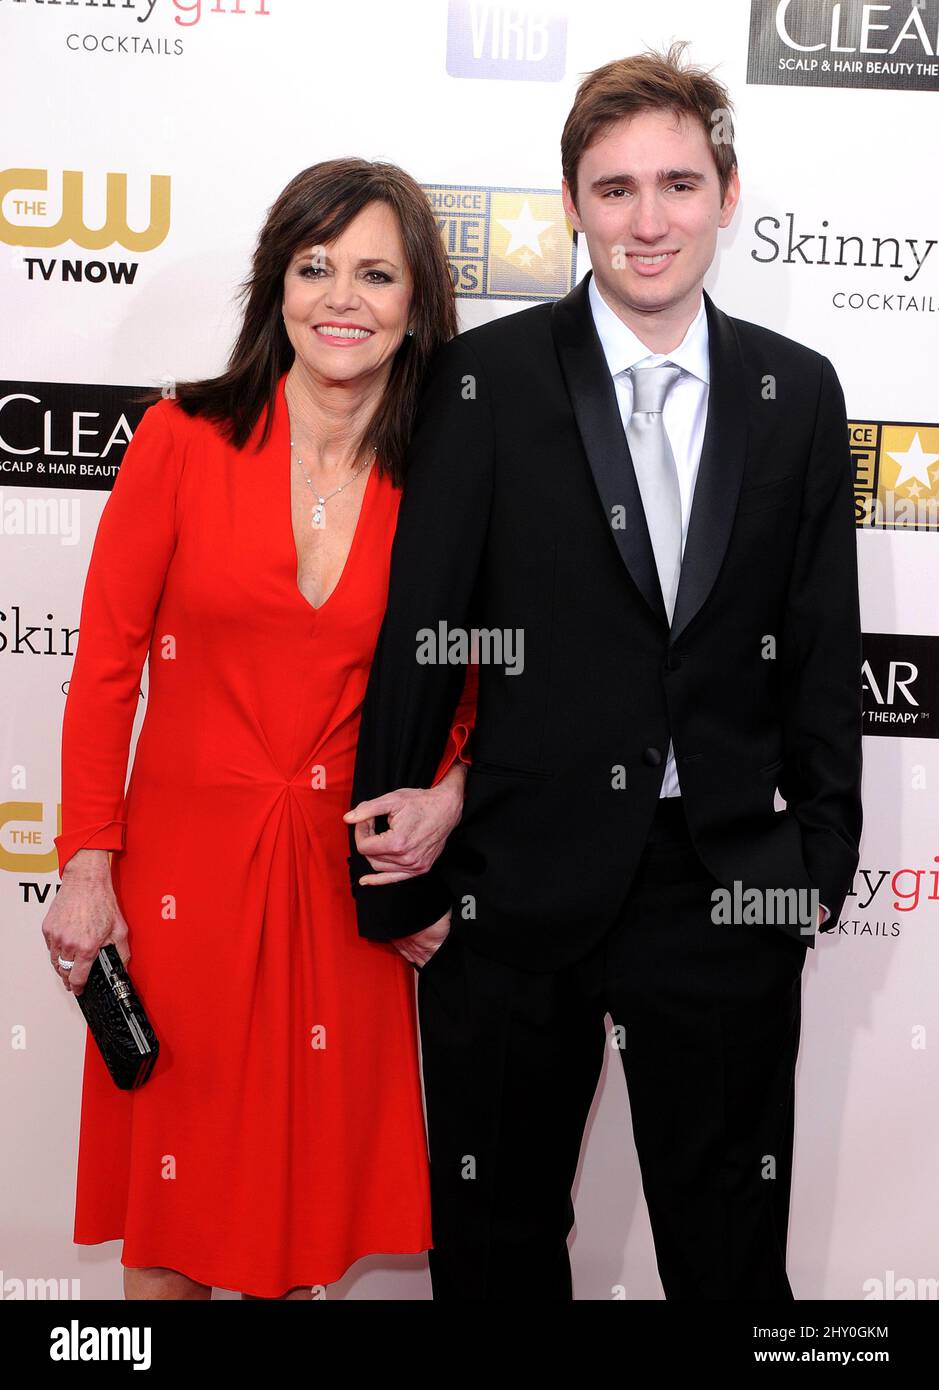 Sally Fields and her son arriving for the 2013 Critics Choice Movie Awards, held at Barker Hanger, Los Angeles, California. Stock Photo